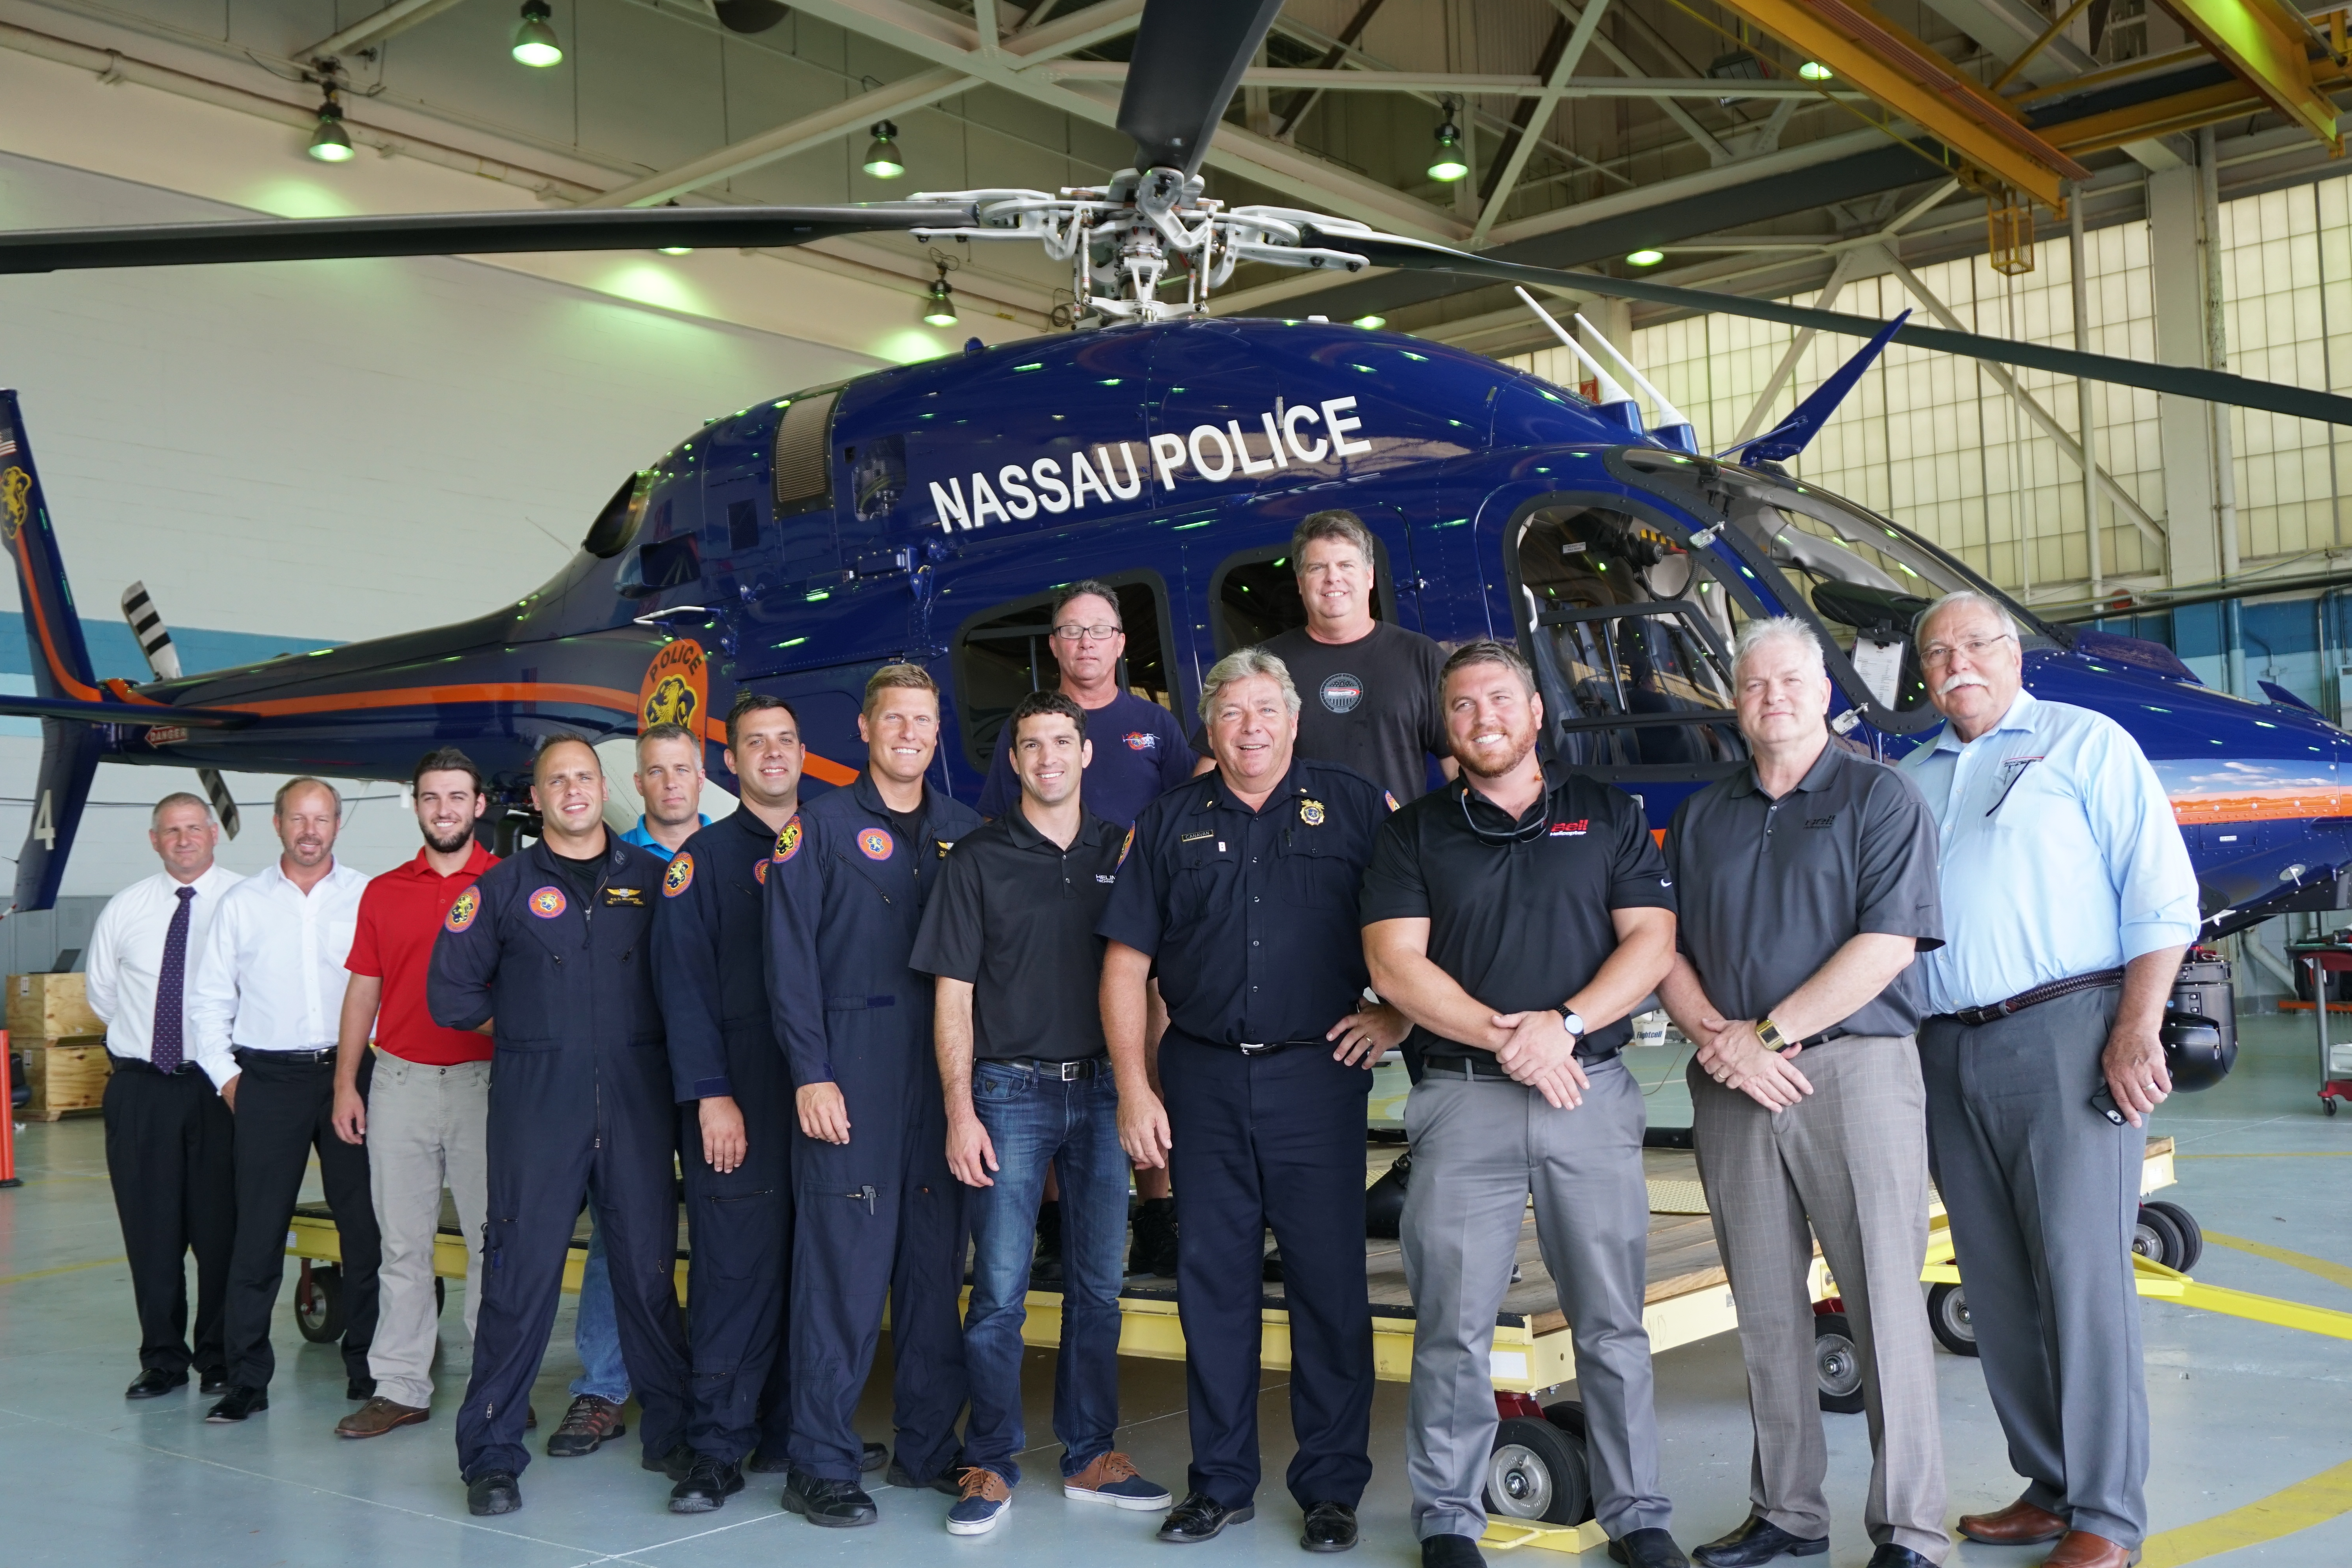 A group of people stands in front of a Nassau Police helicopter